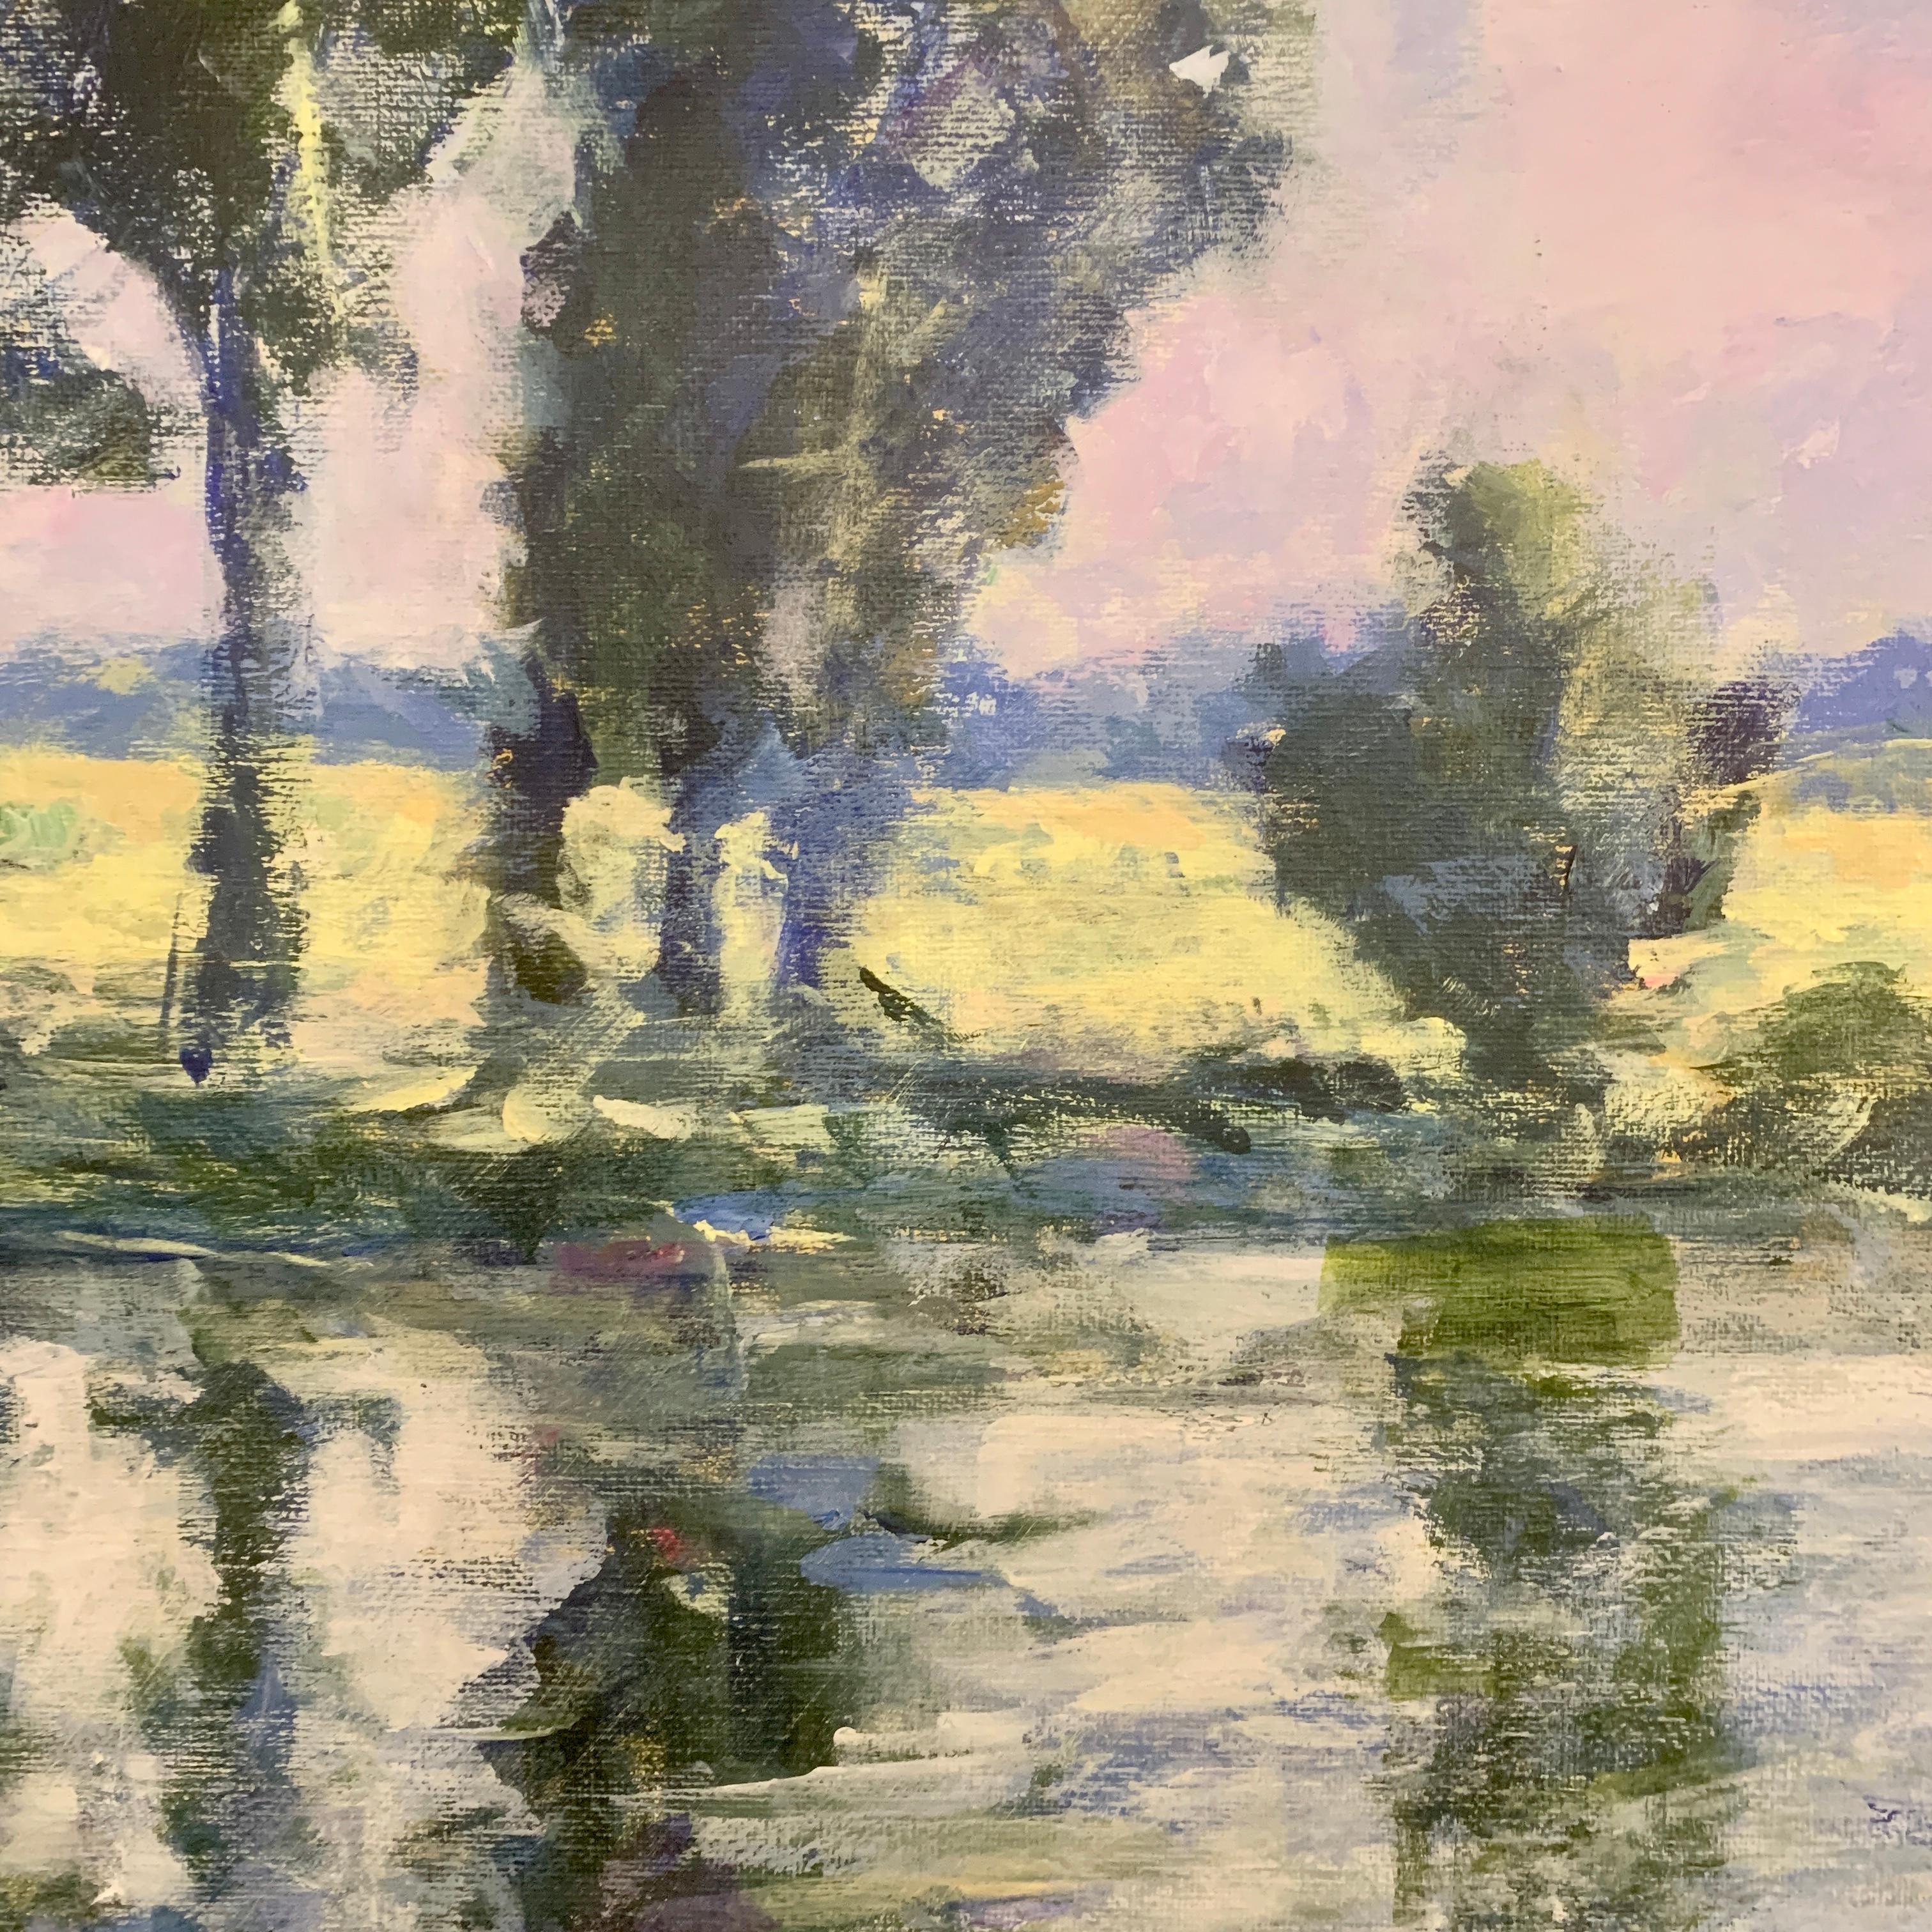 Abstract English Impressionist landscape with sunlight river and trees by a bank - Painting by Charles Bertie Hall